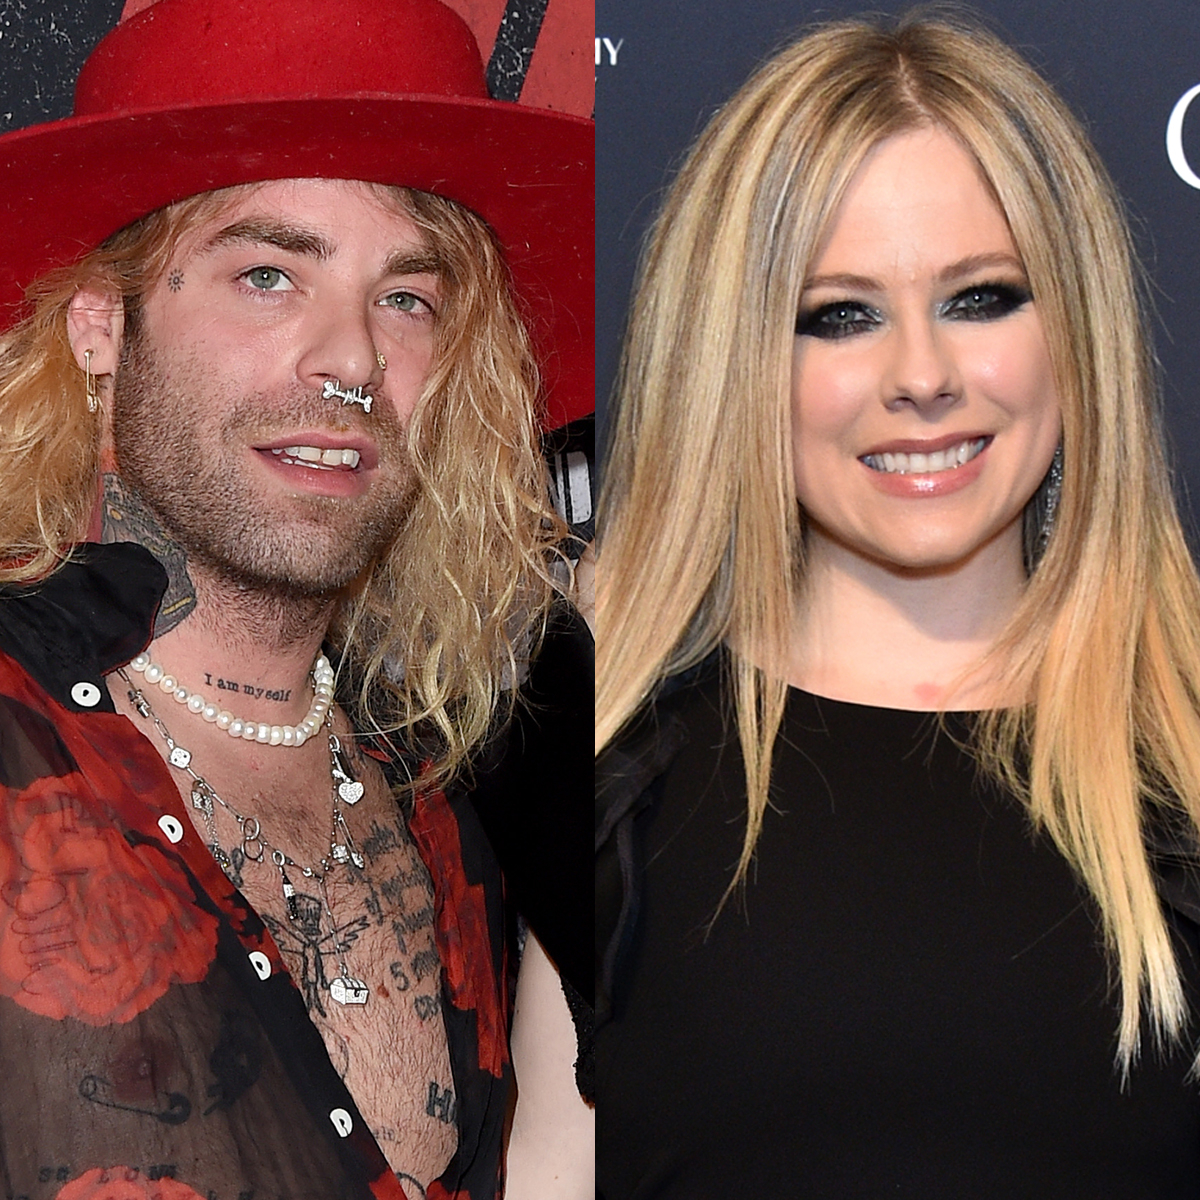 Avril Lavigne Porn - Mod Sun has tattooed Avril Lavigne's name on his neck in dating  rumors-E!online - London News Time